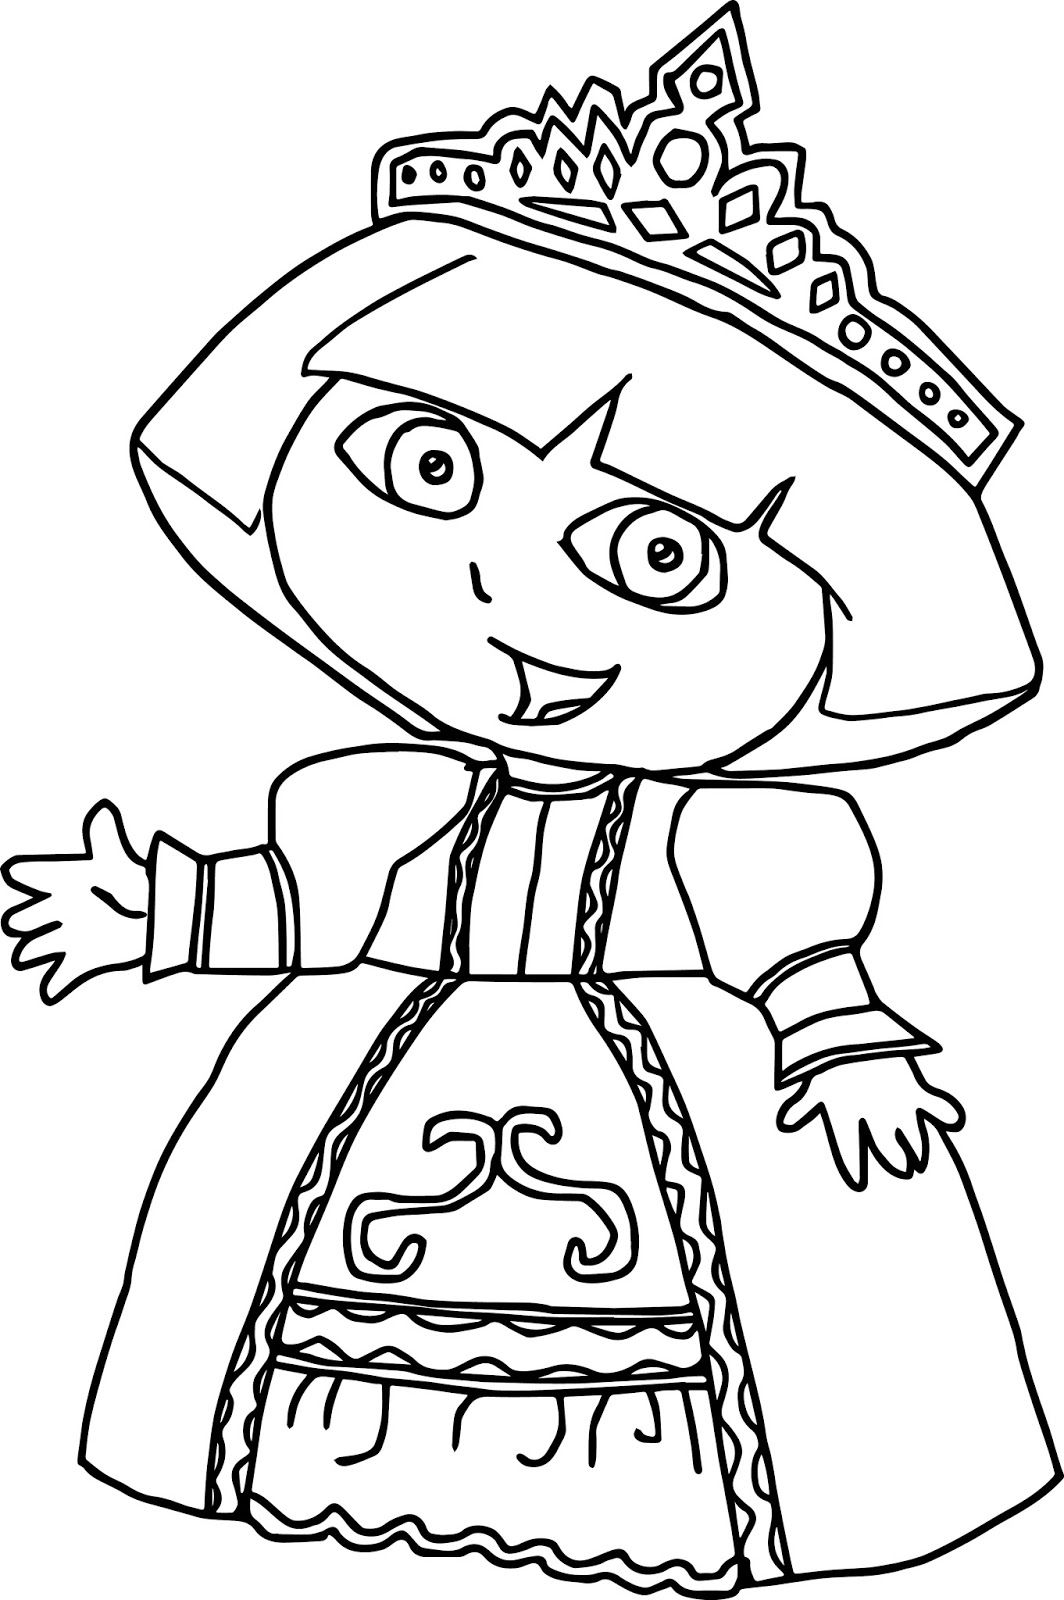 dora-the-explorer-coloring-pages-coloring-pictures-coloring-home